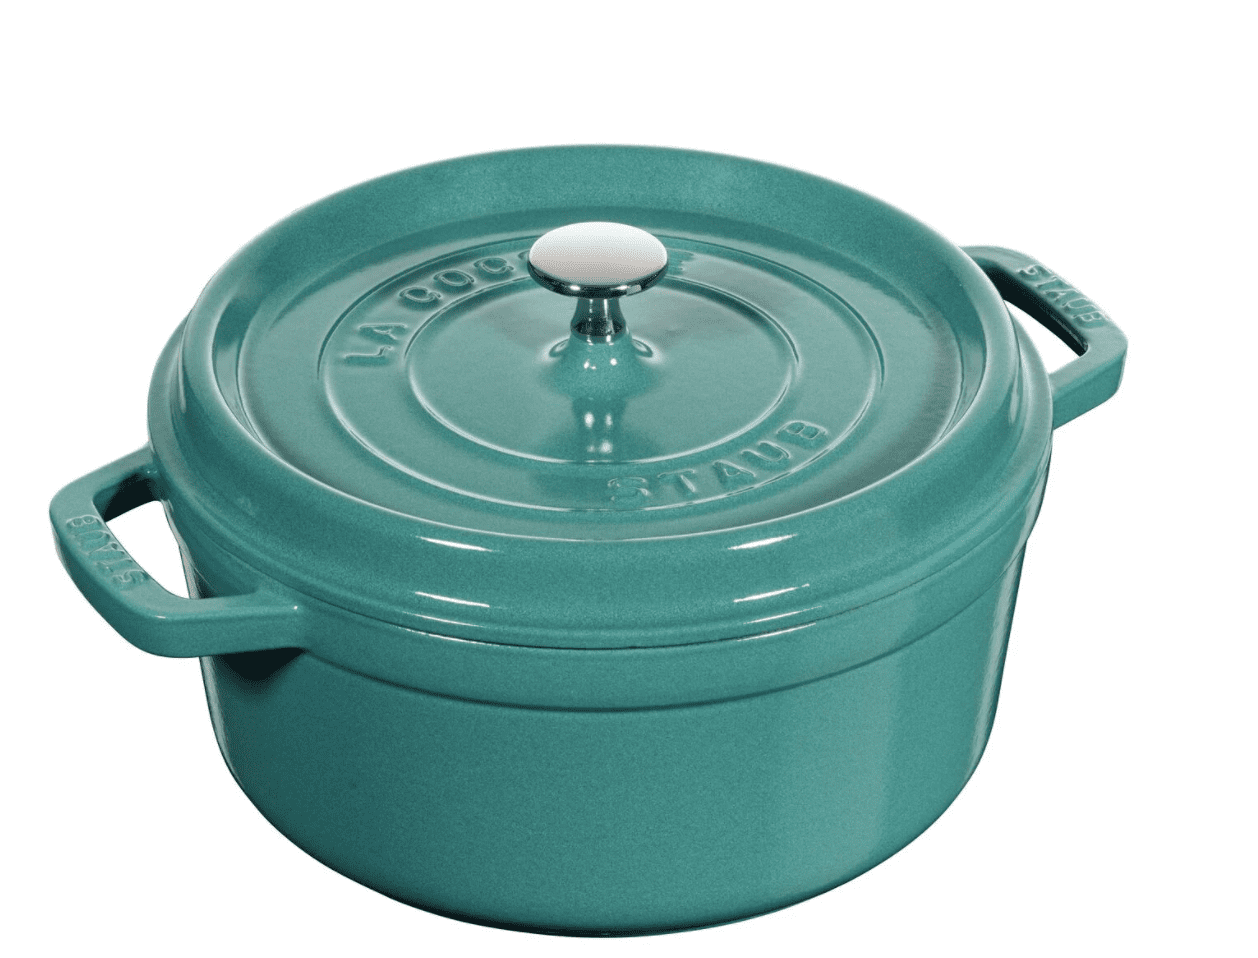 Staub Dutch oven: Get this iconic cookware at its lowest price